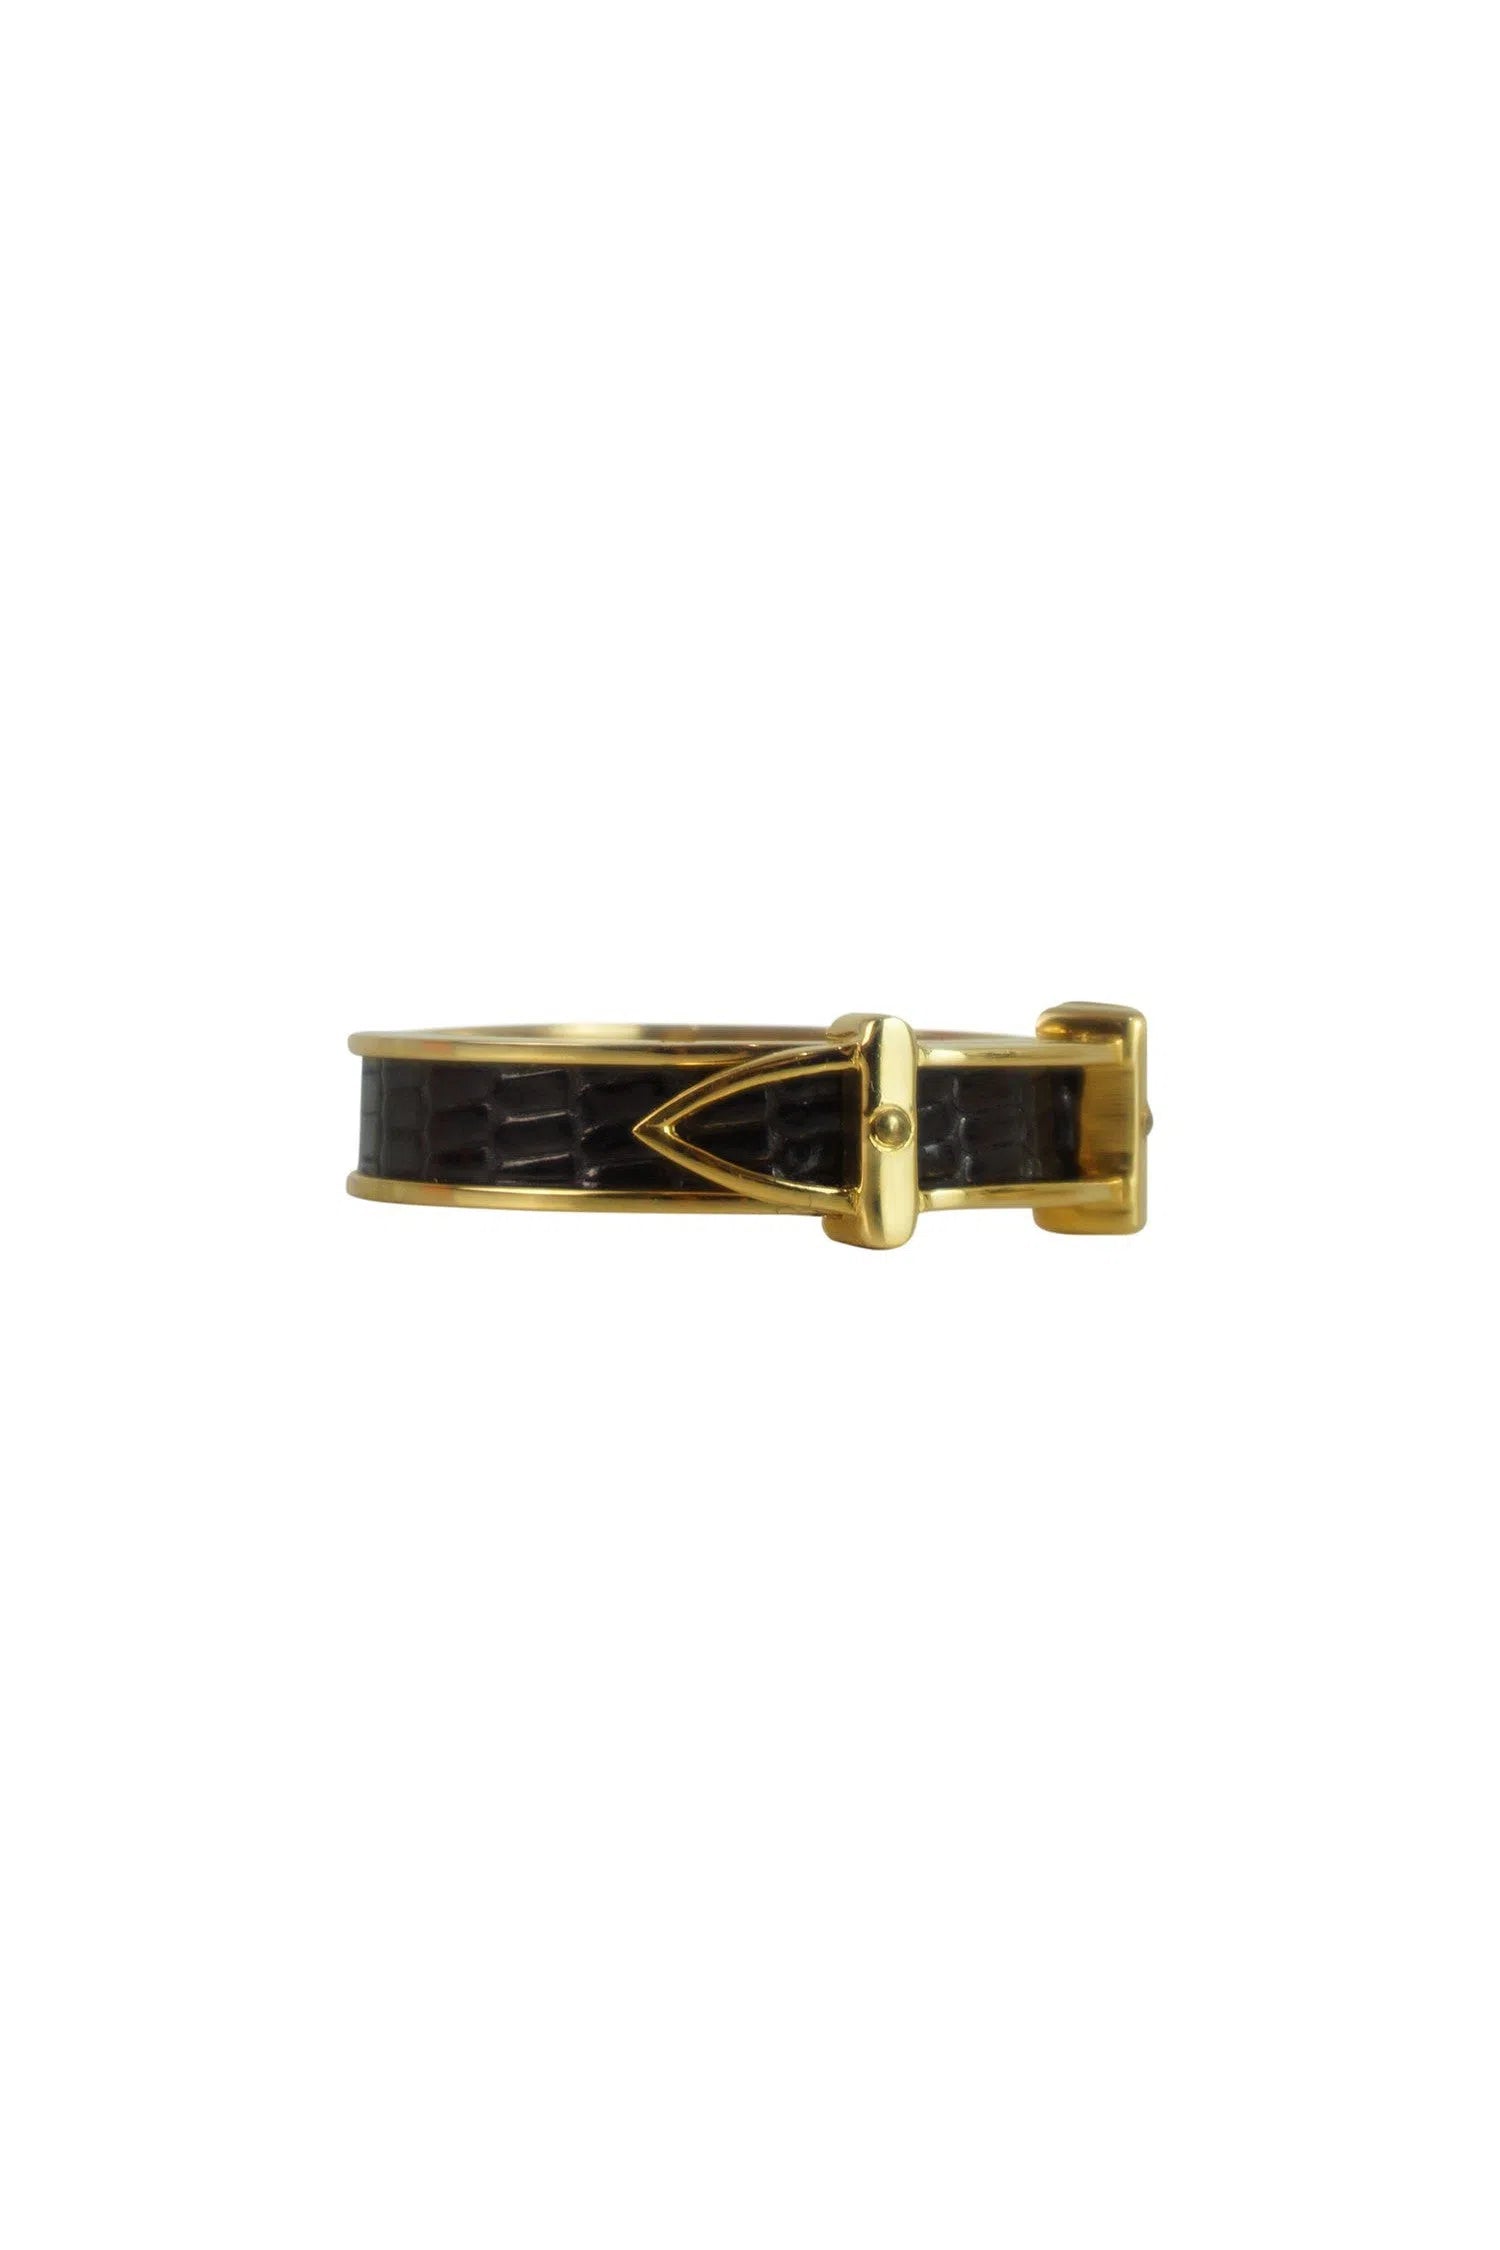 Hermès Gold Buckle GM Scarf Ring for 140cm Scarf